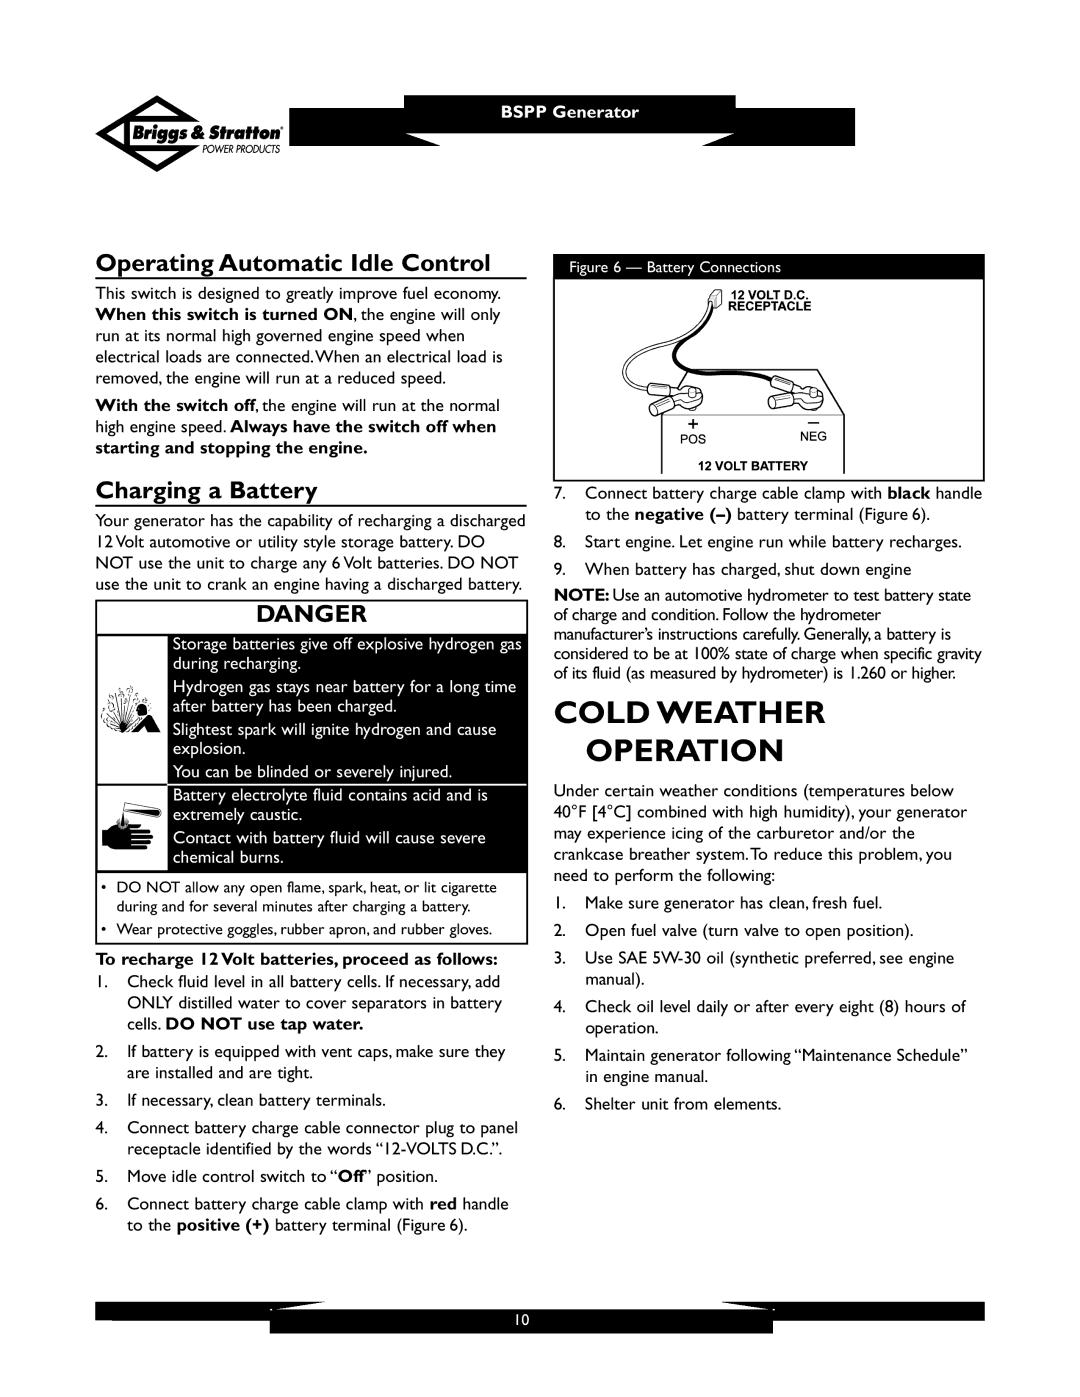 Briggs & Stratton PRO6500 owner manual Cold Weather Operation, Operating Automatic Idle Control, Charging a Battery 